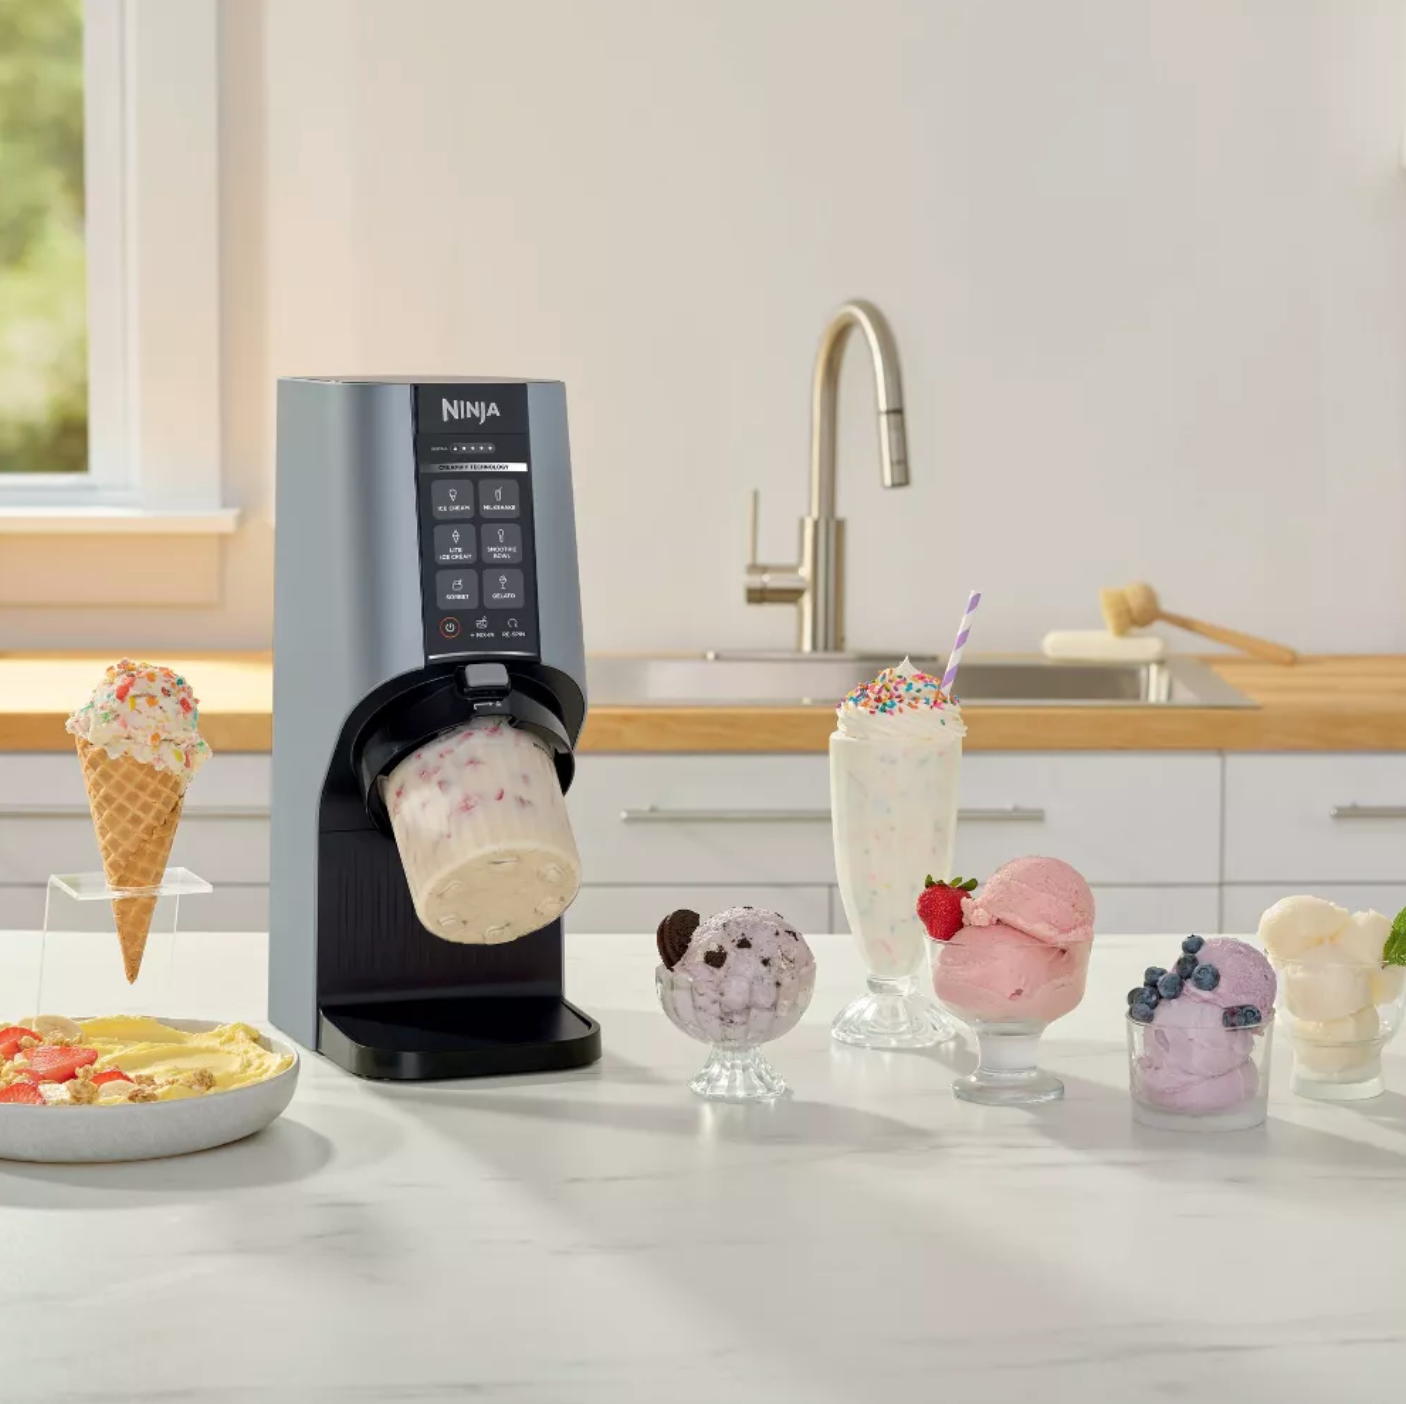 Does anyone bought Ninja CREAMi ice cream maker? How is it? Is it